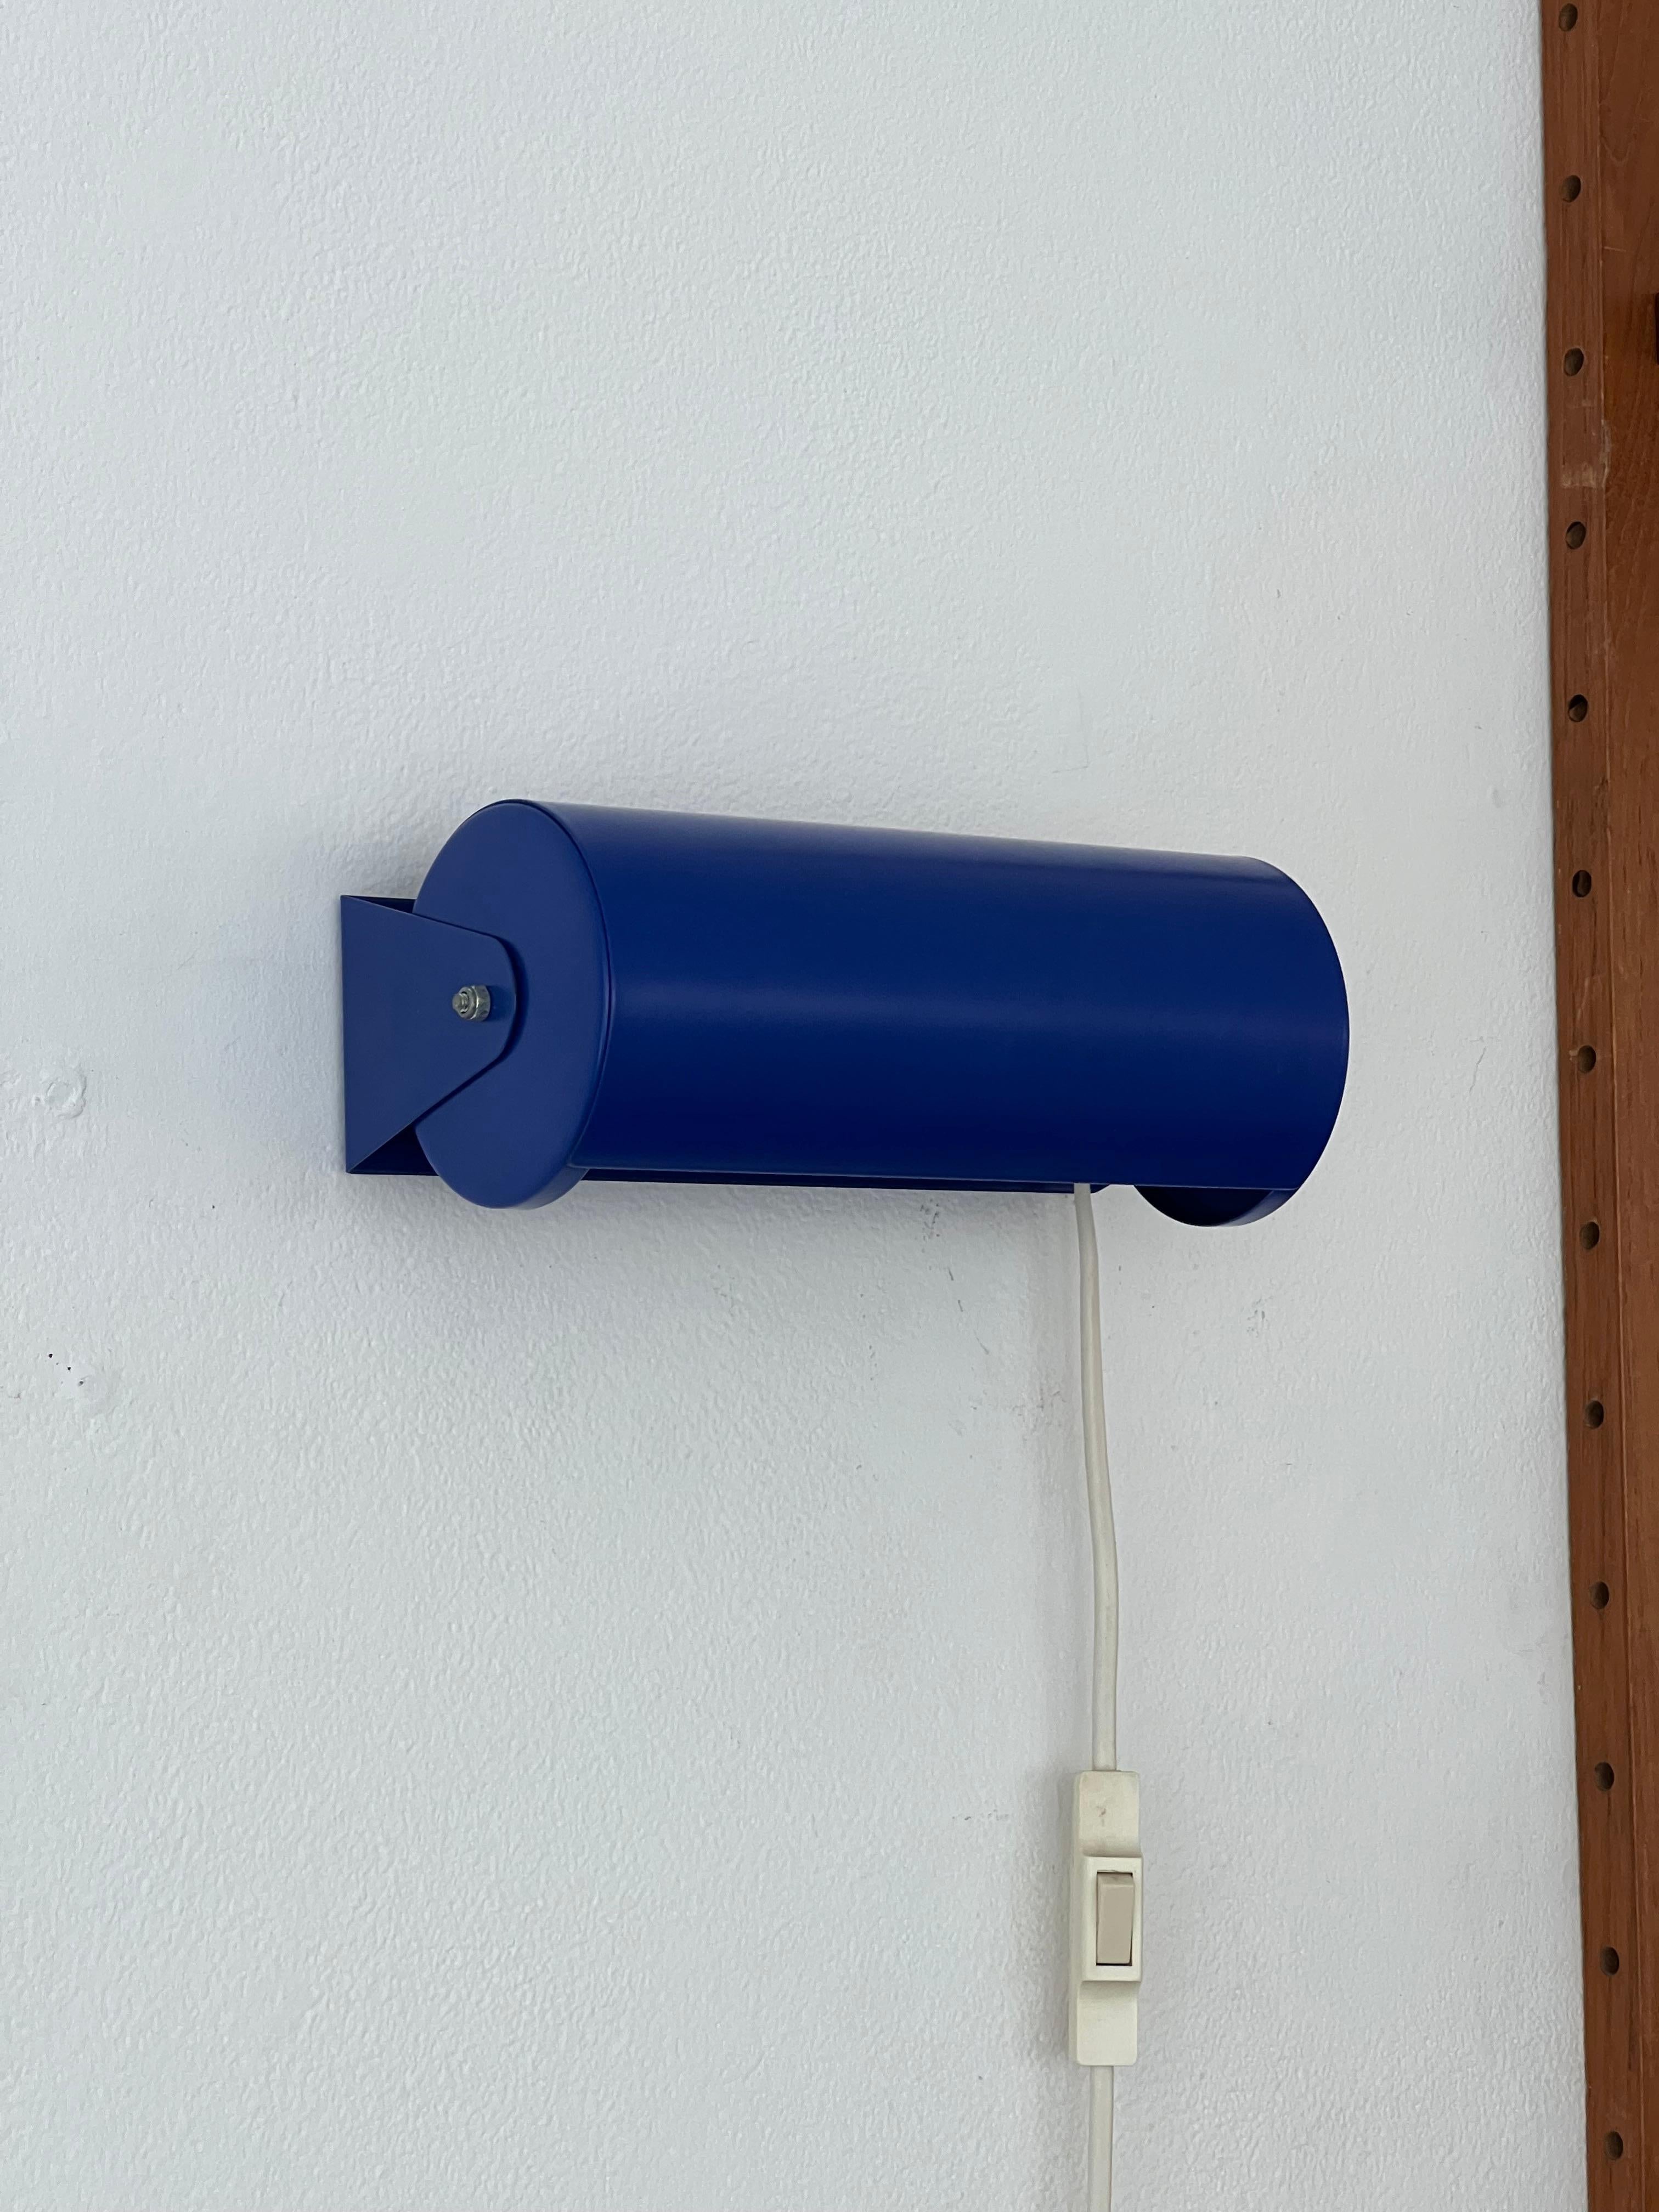 Cylindrical wall lamp produced by Ikea in the 80s.
It is composed of a blue lacquered metal body. The lampshade can be adjusted to vary the light beam.
In very good condition, due to age and use.